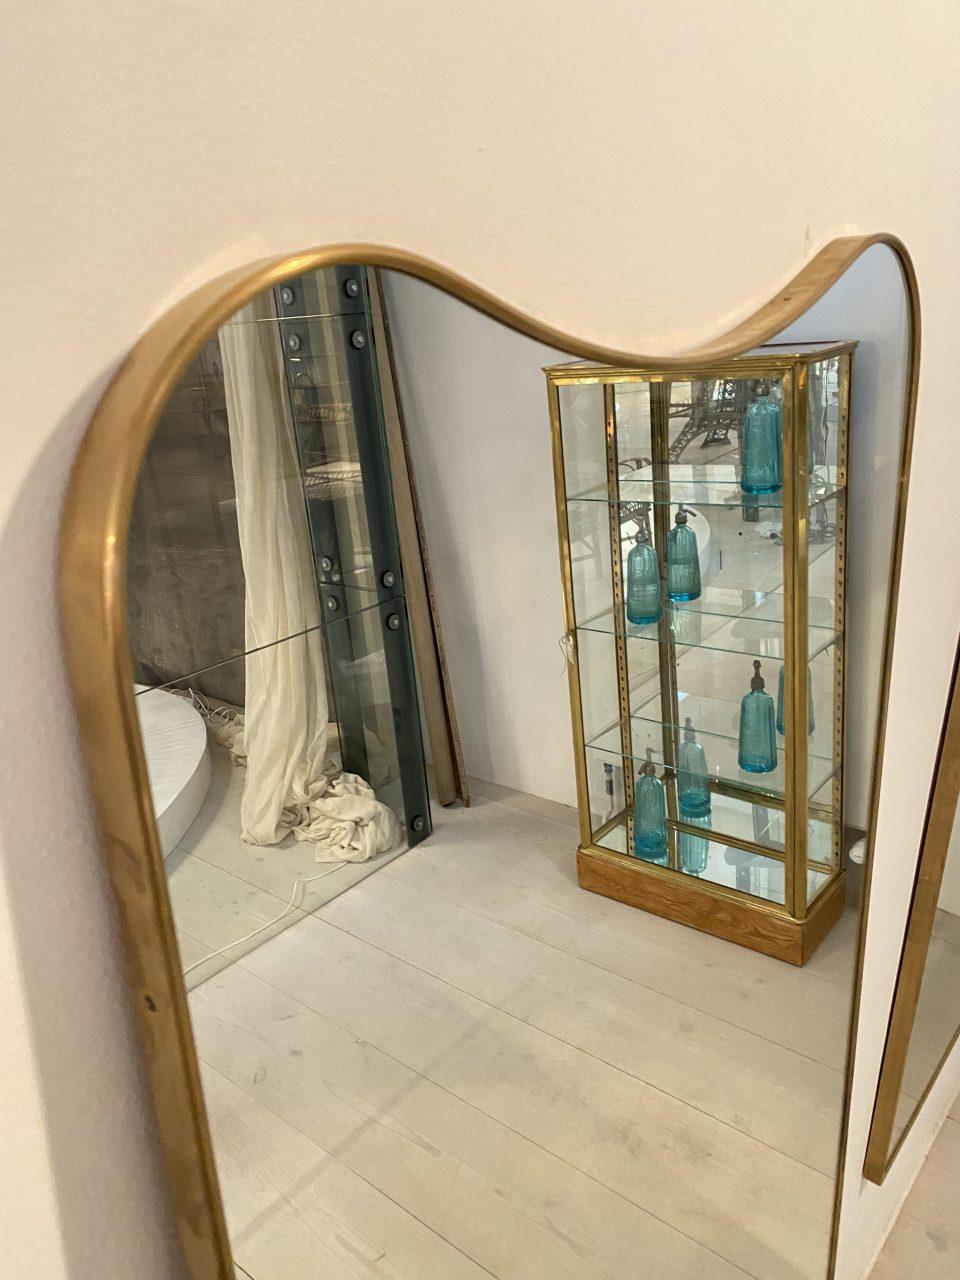 Stunning full length midcentury brass mirror from circa 1960s Italy. It has a sleek and tight quality brass frame with a rounded profile, and bowed top in its rectangular form.

Original mirrored glass, and stylistically related to the designer